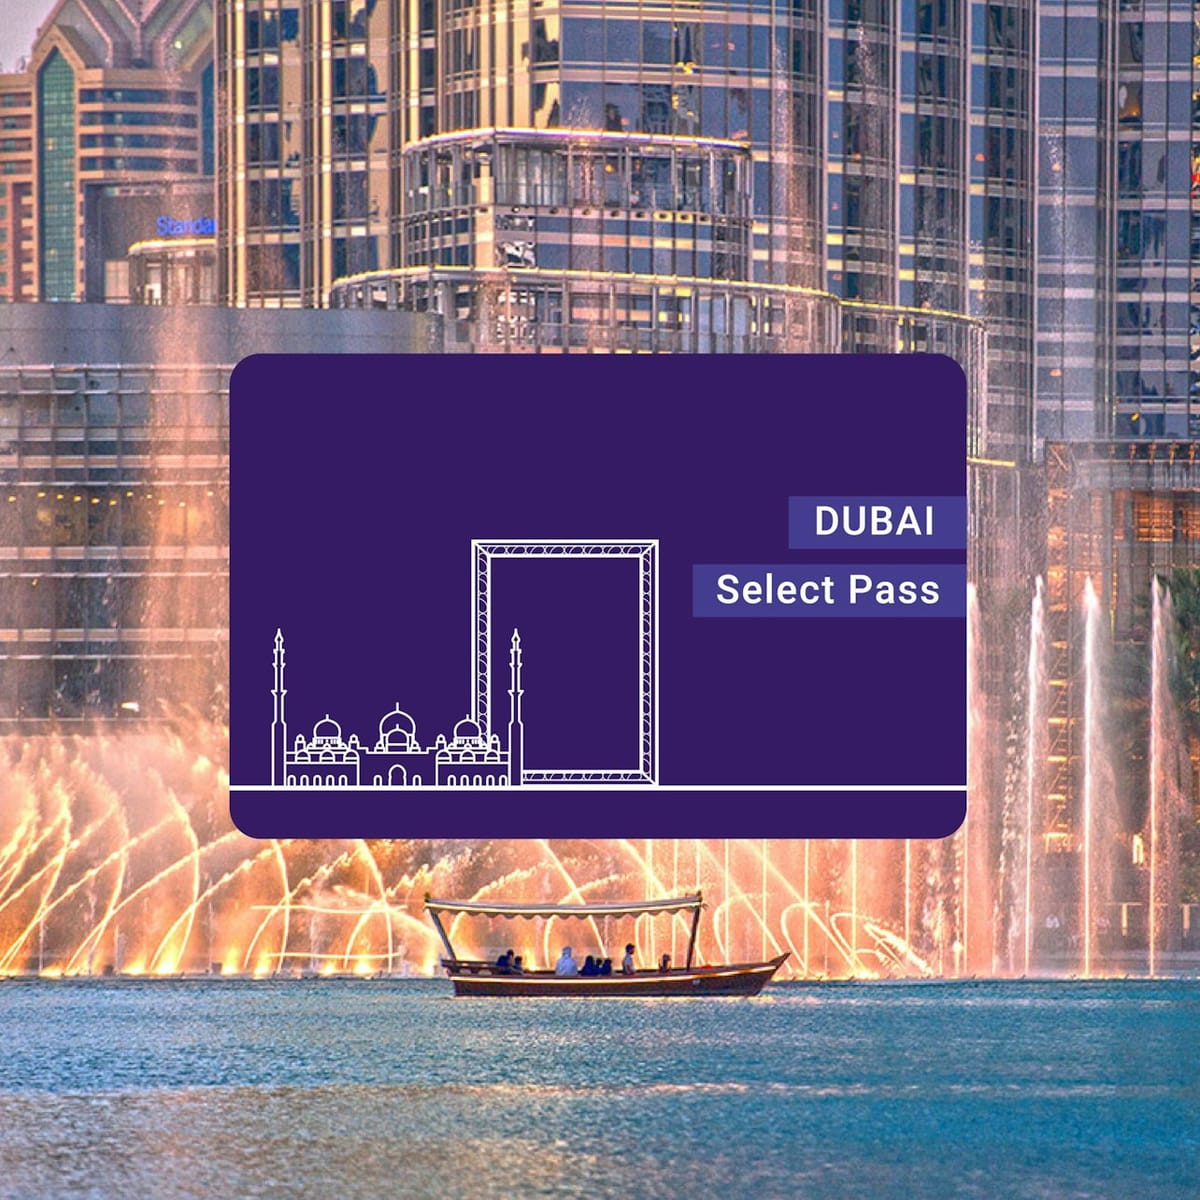 dubai-iventure-select-pass-choice-of-3-top-attractions_1